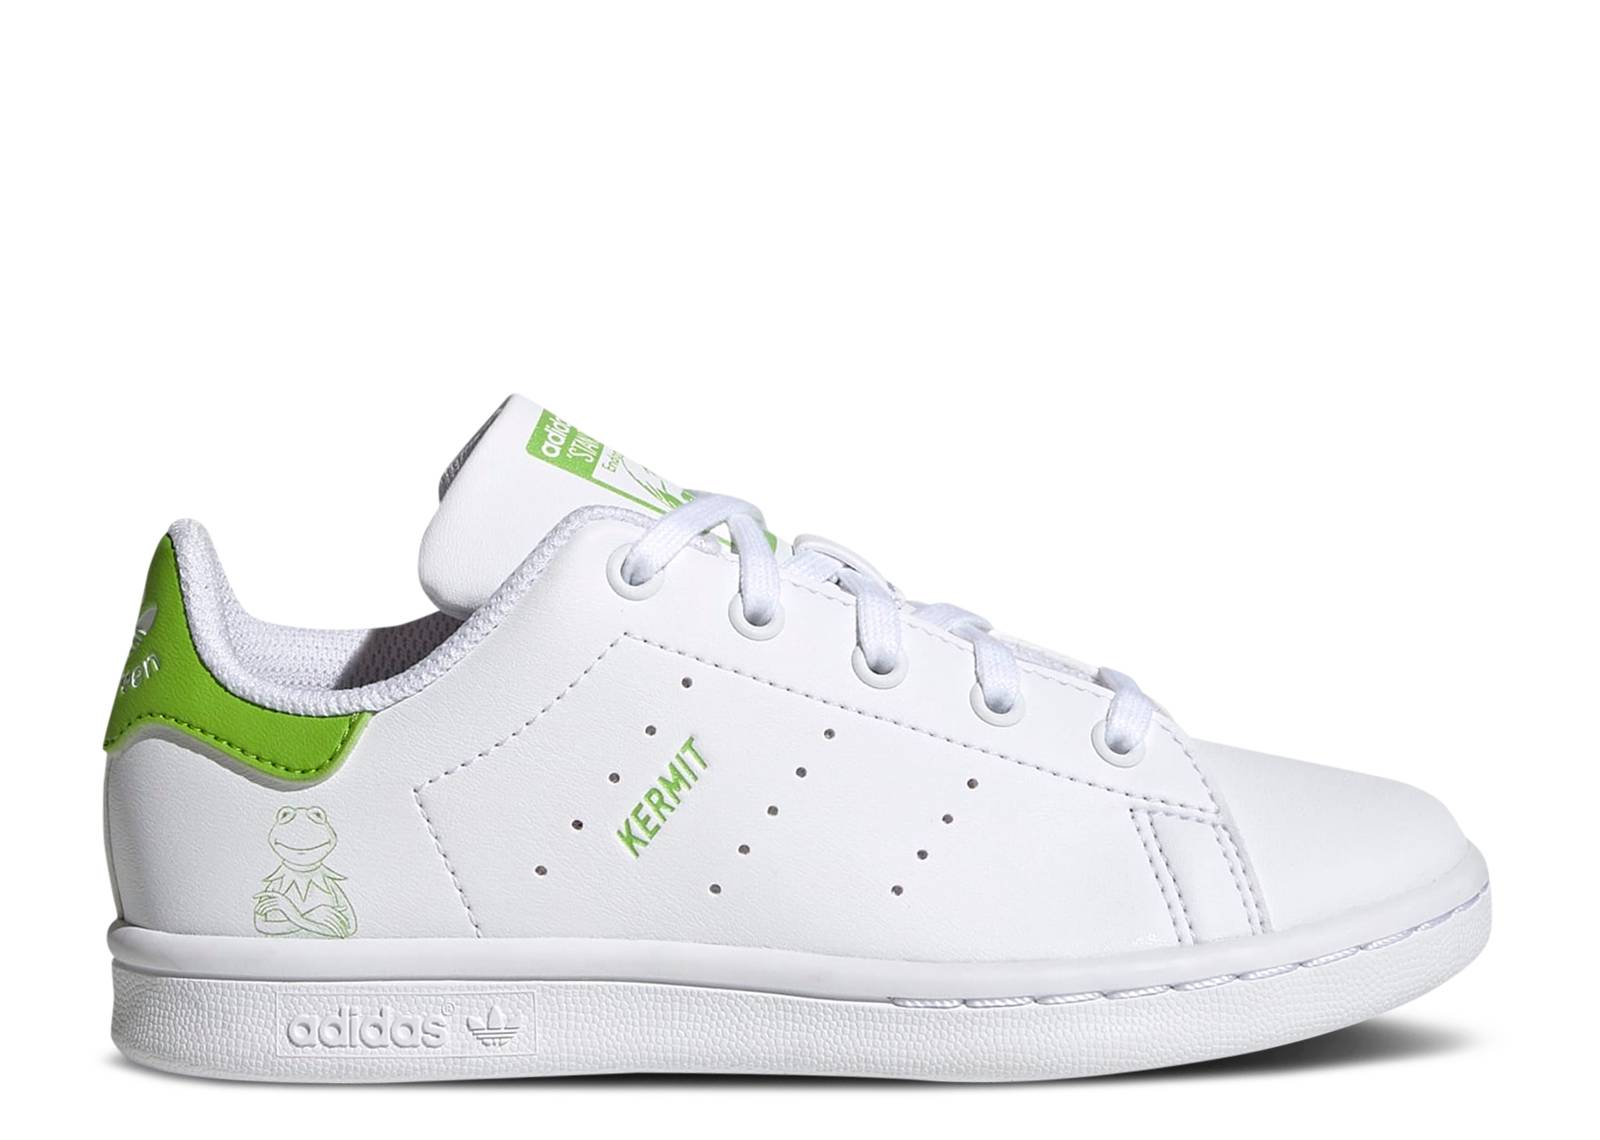 The Muppets x Stan Smith Little Kid 'Kermit The Frog'